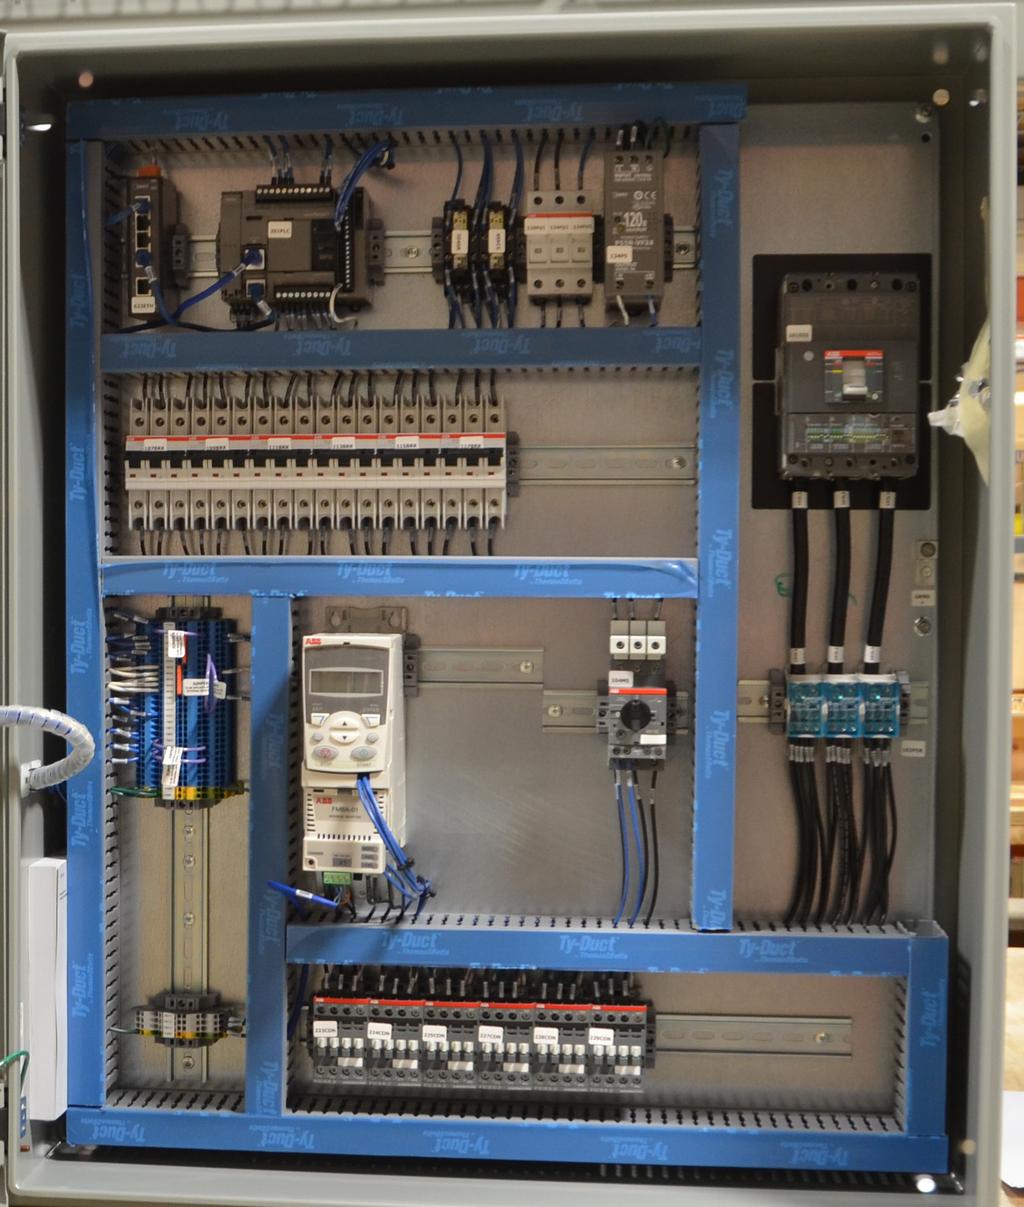 Control Panel Installation WARNING: Always follow ALL local codes and regulations for installation of this panel. We highly recommend hiring a certified electrician for this work!